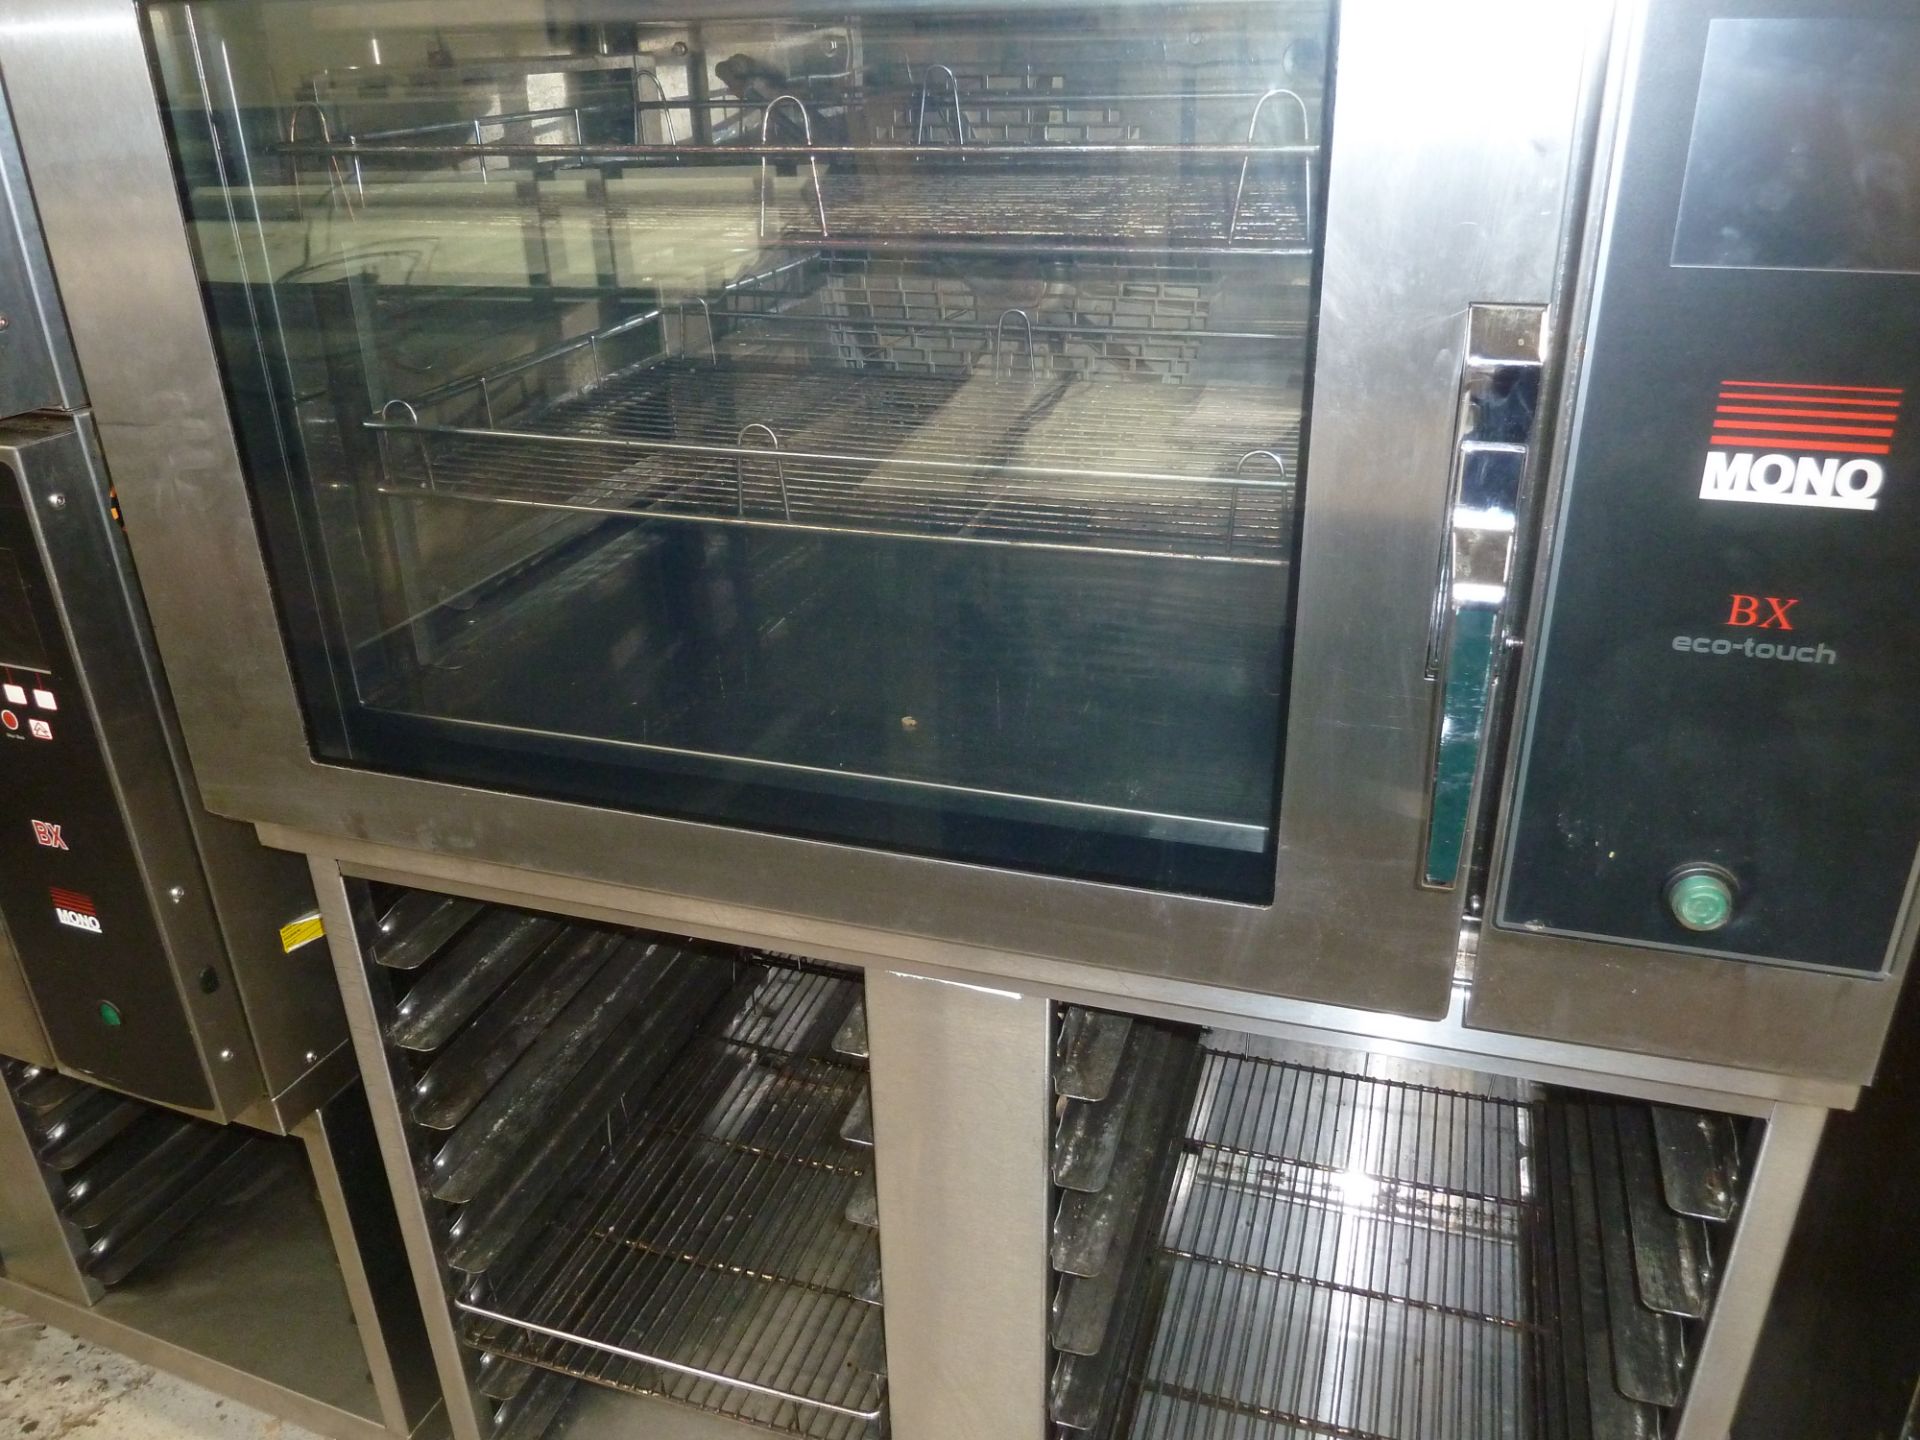 * BX Mono BX Mono bakery oven single with stand, like new.(1000Wx1370Hx880D) - Image 5 of 5